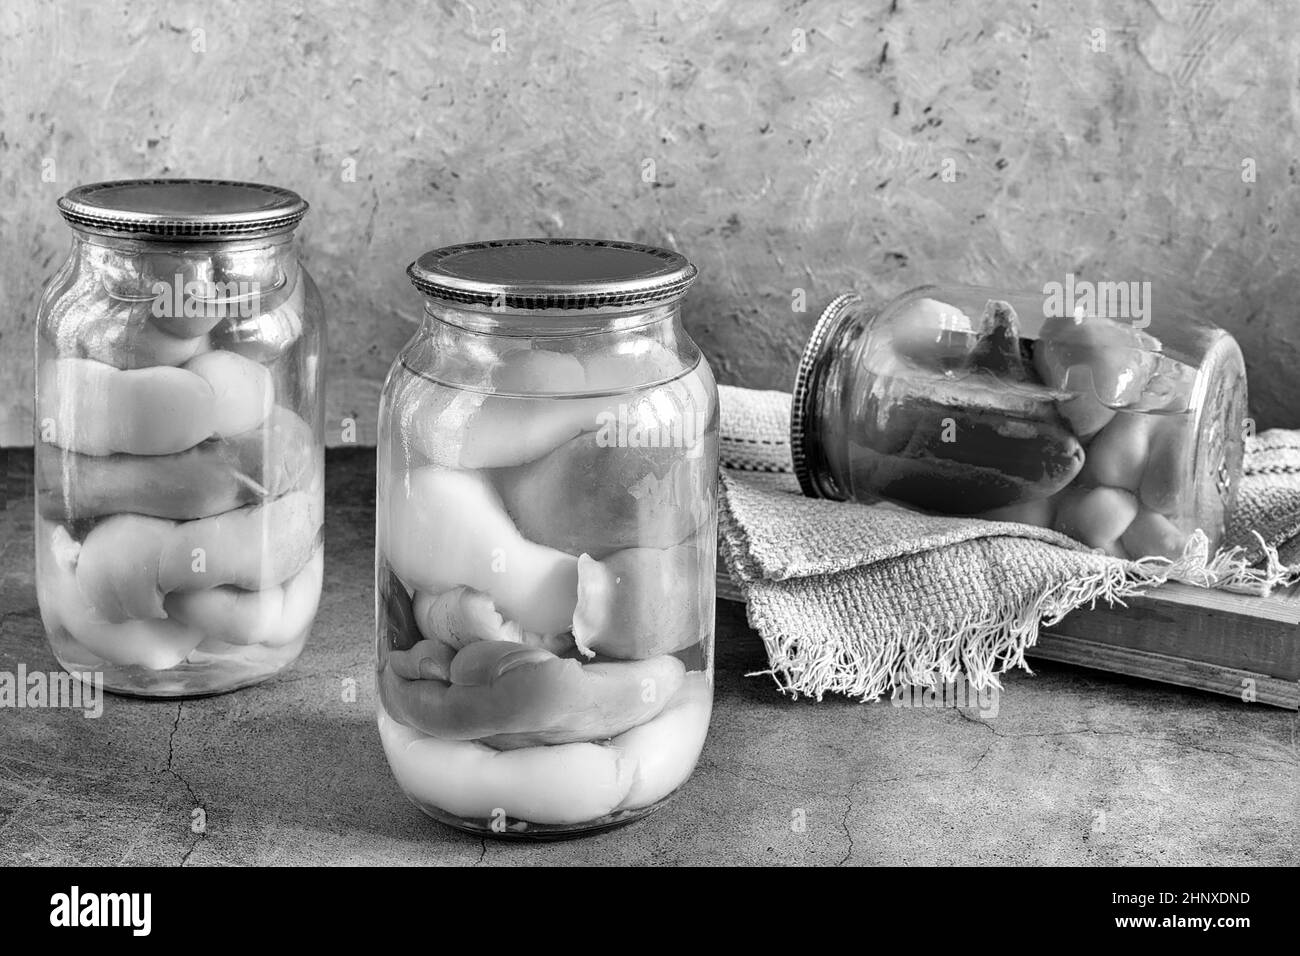 Canned bell peppers in glass jars, intended for further stuffing. Home canning. Front view, copy space. Black and white photo. Stock Photo